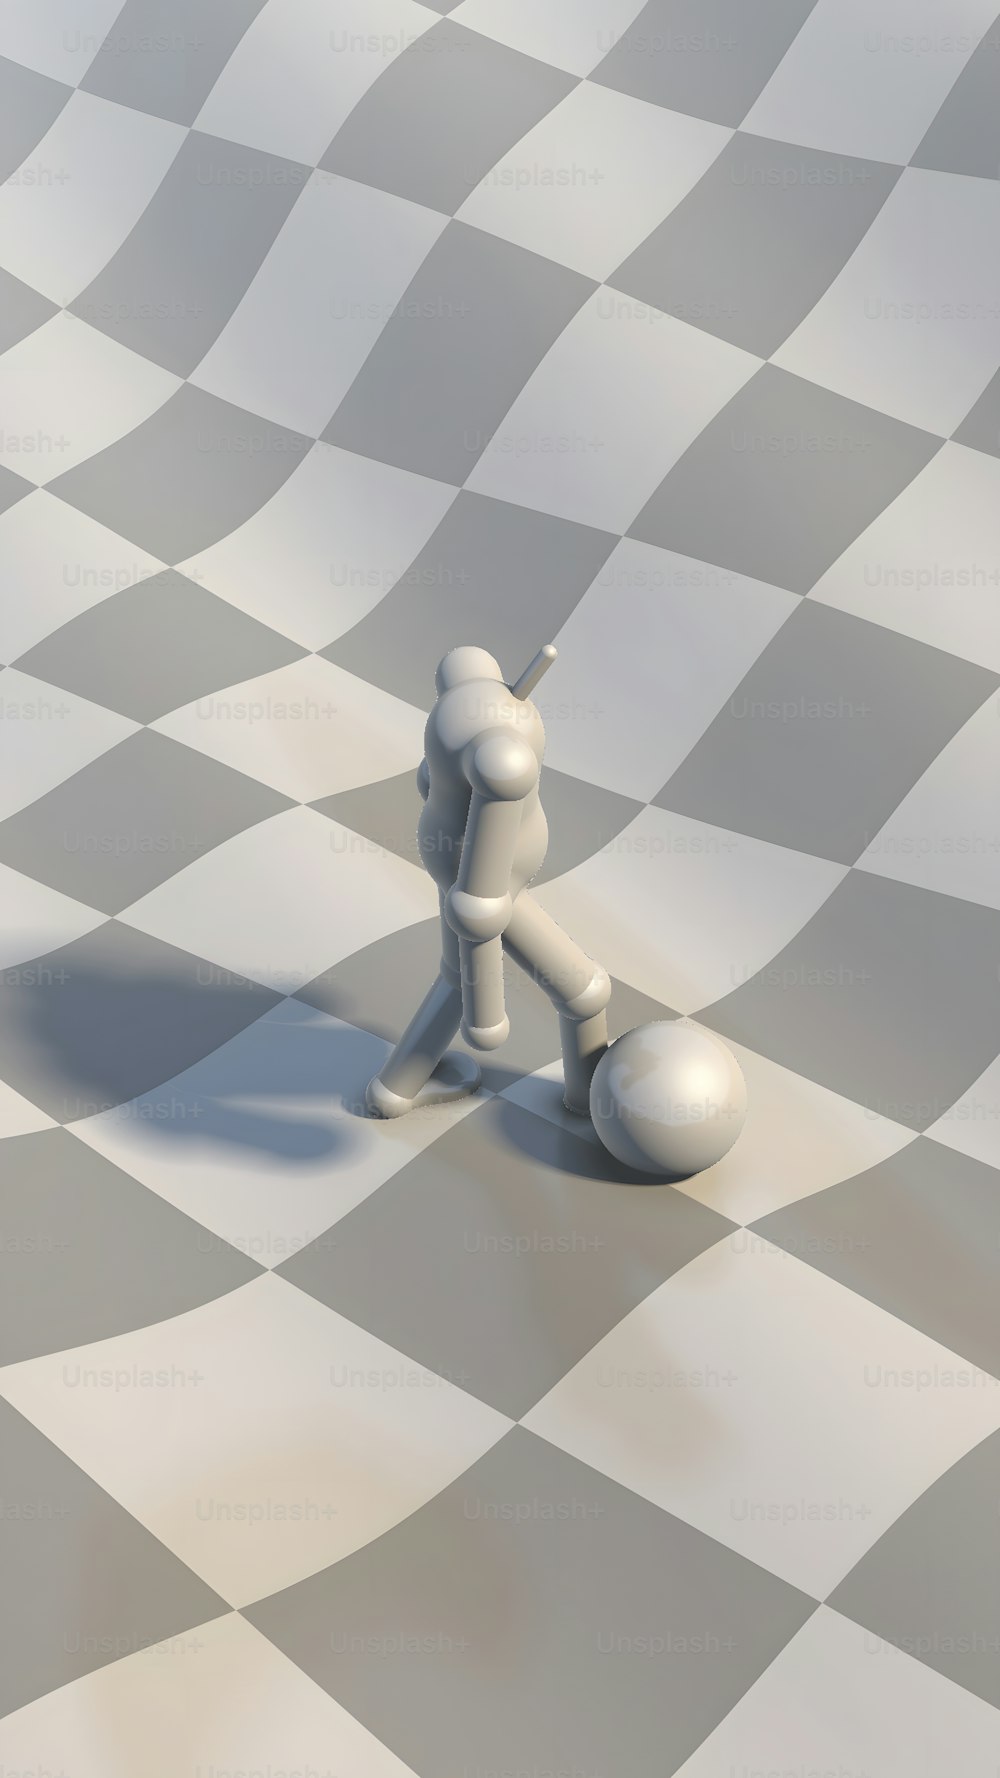 a person standing on top of a chess board